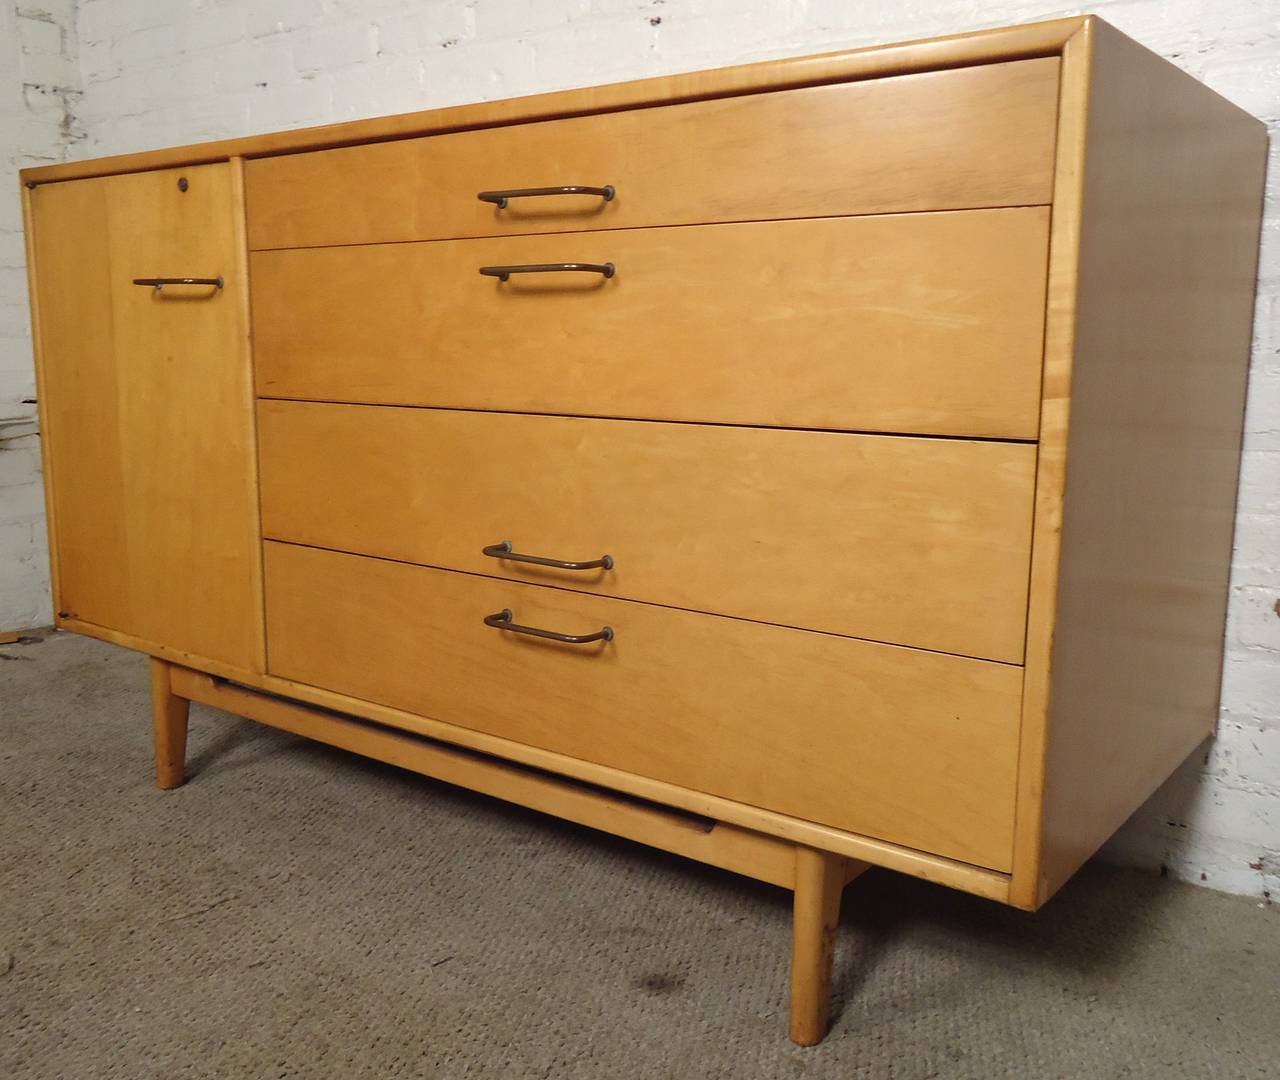 Vintage Jens Risom maple credenza.
One cabinet with adjustable shelf.
Four drawers all with bent brass handles.
Sculpted legs.

(Please confirm item location - NY or NJ - with dealer).